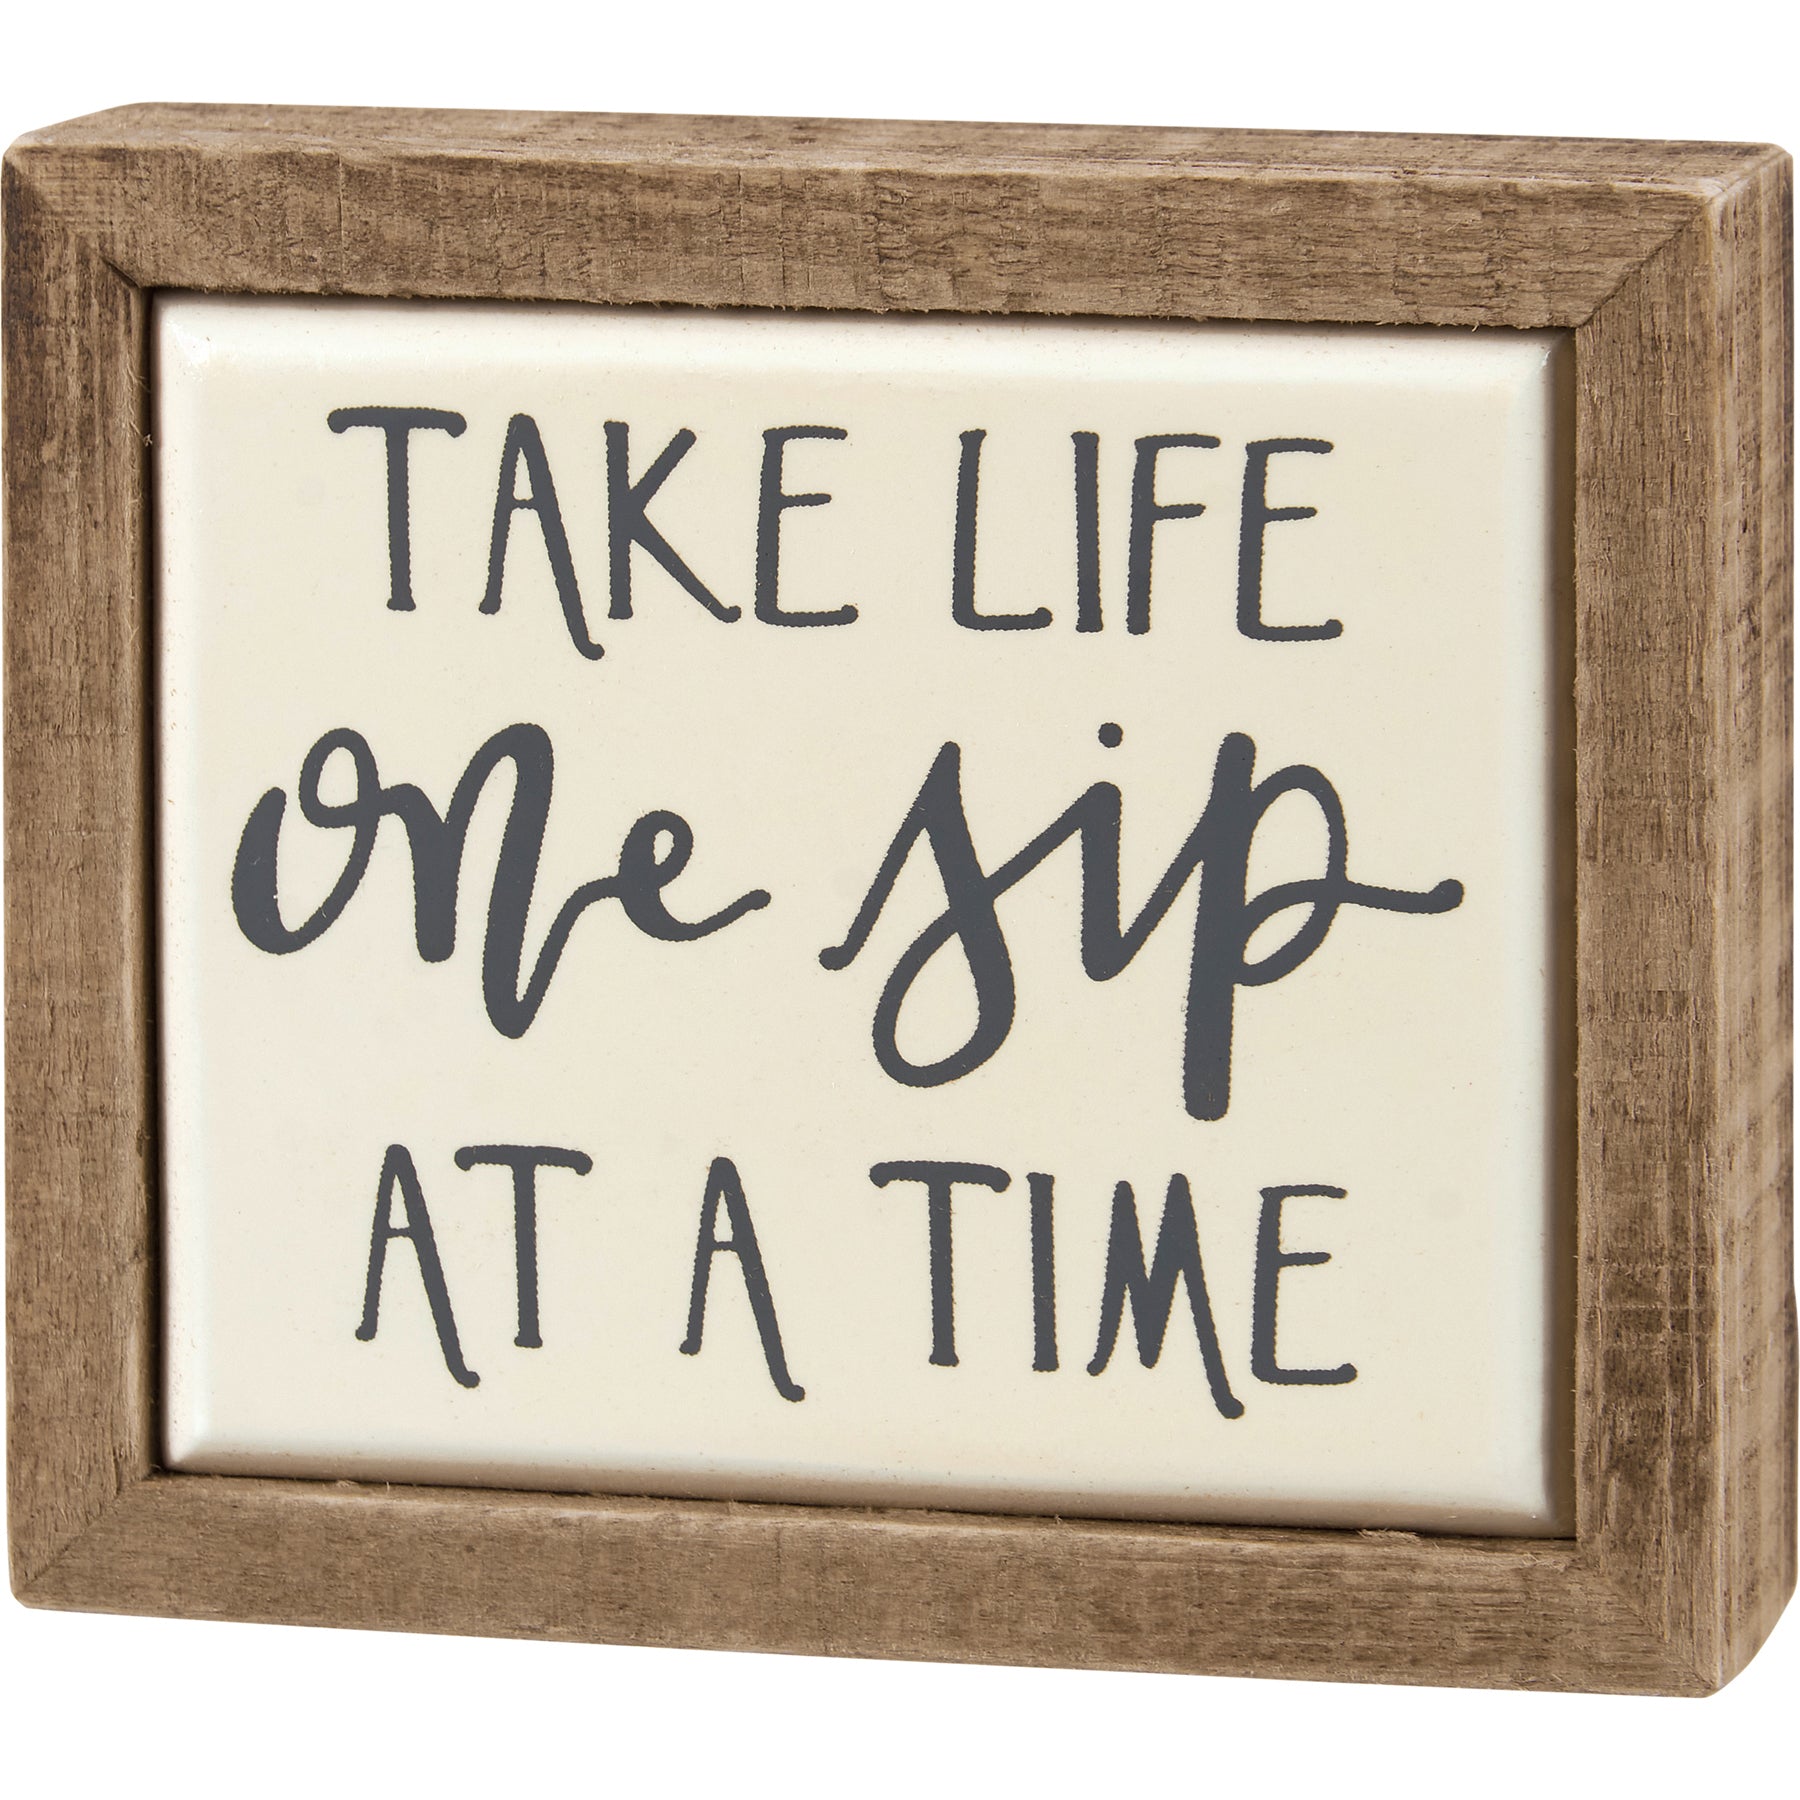 Take Life One Sip At A Time Mini Box Sign